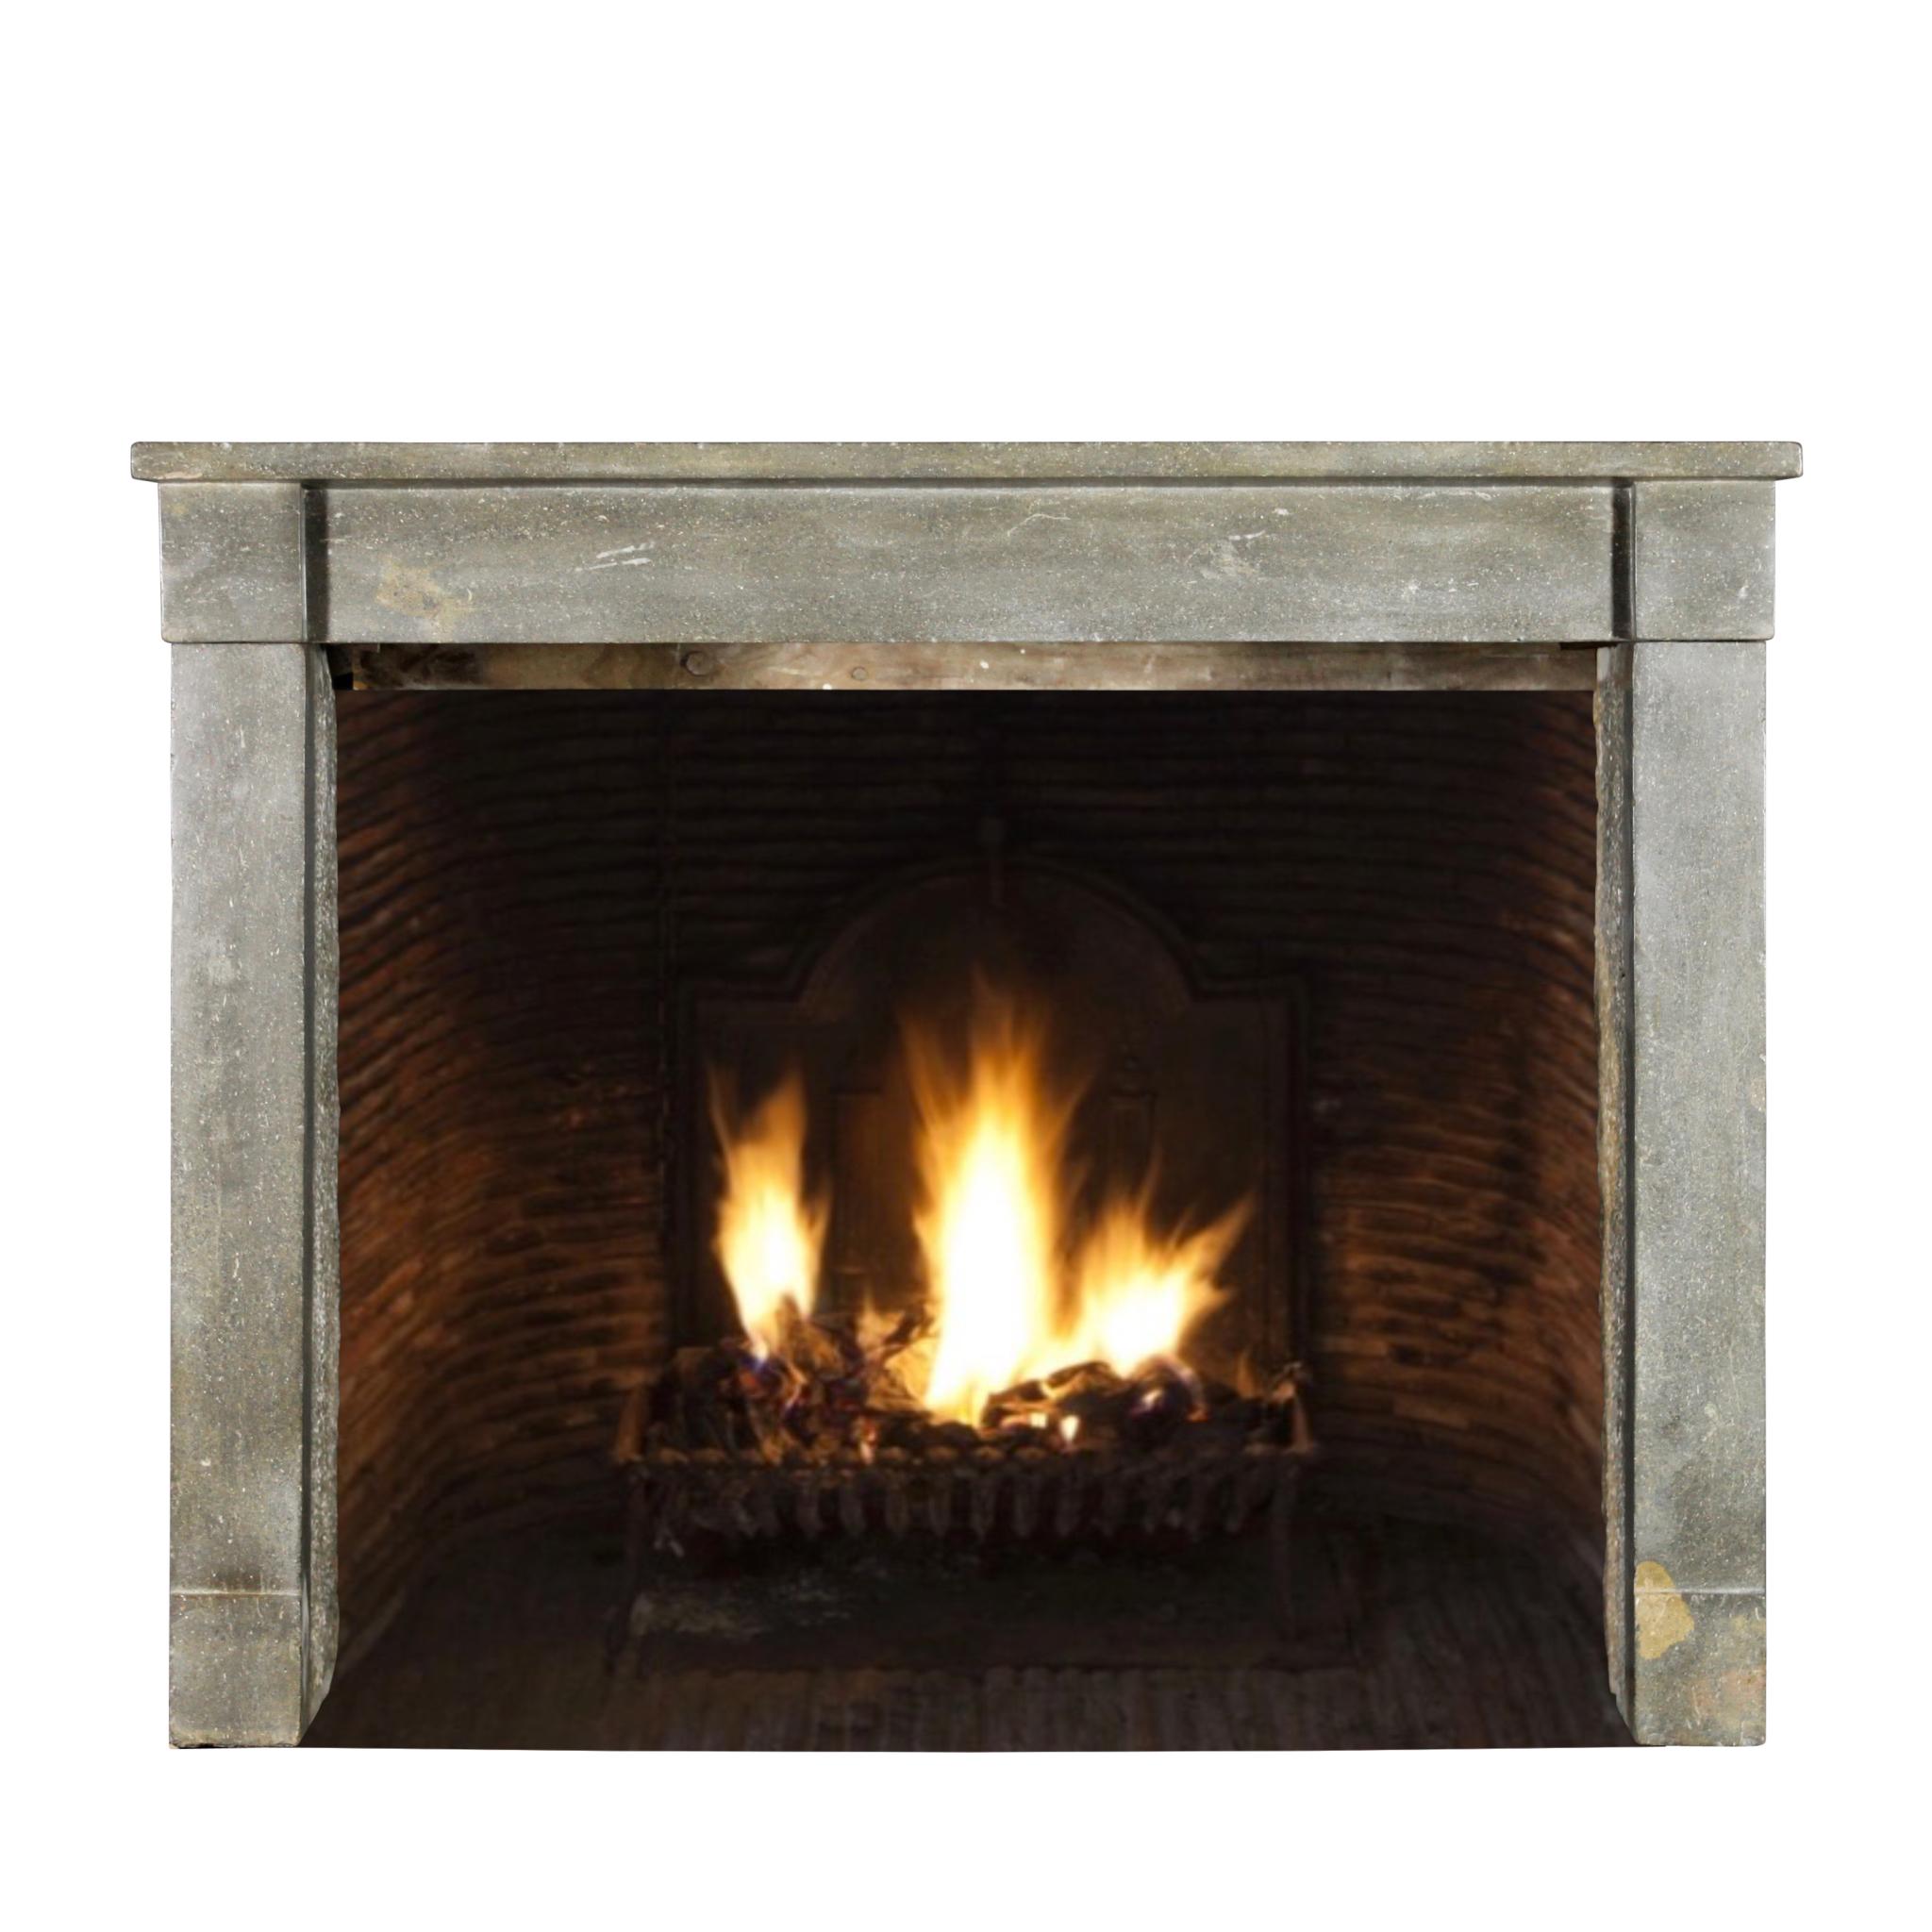 This fine 19th century European antique fireplace surround in a bicolor marble hard stone/marble has return pieces that can be used for a smaller upper mantle. The piece has straight lines and can be used in a contemporary or modern interior.